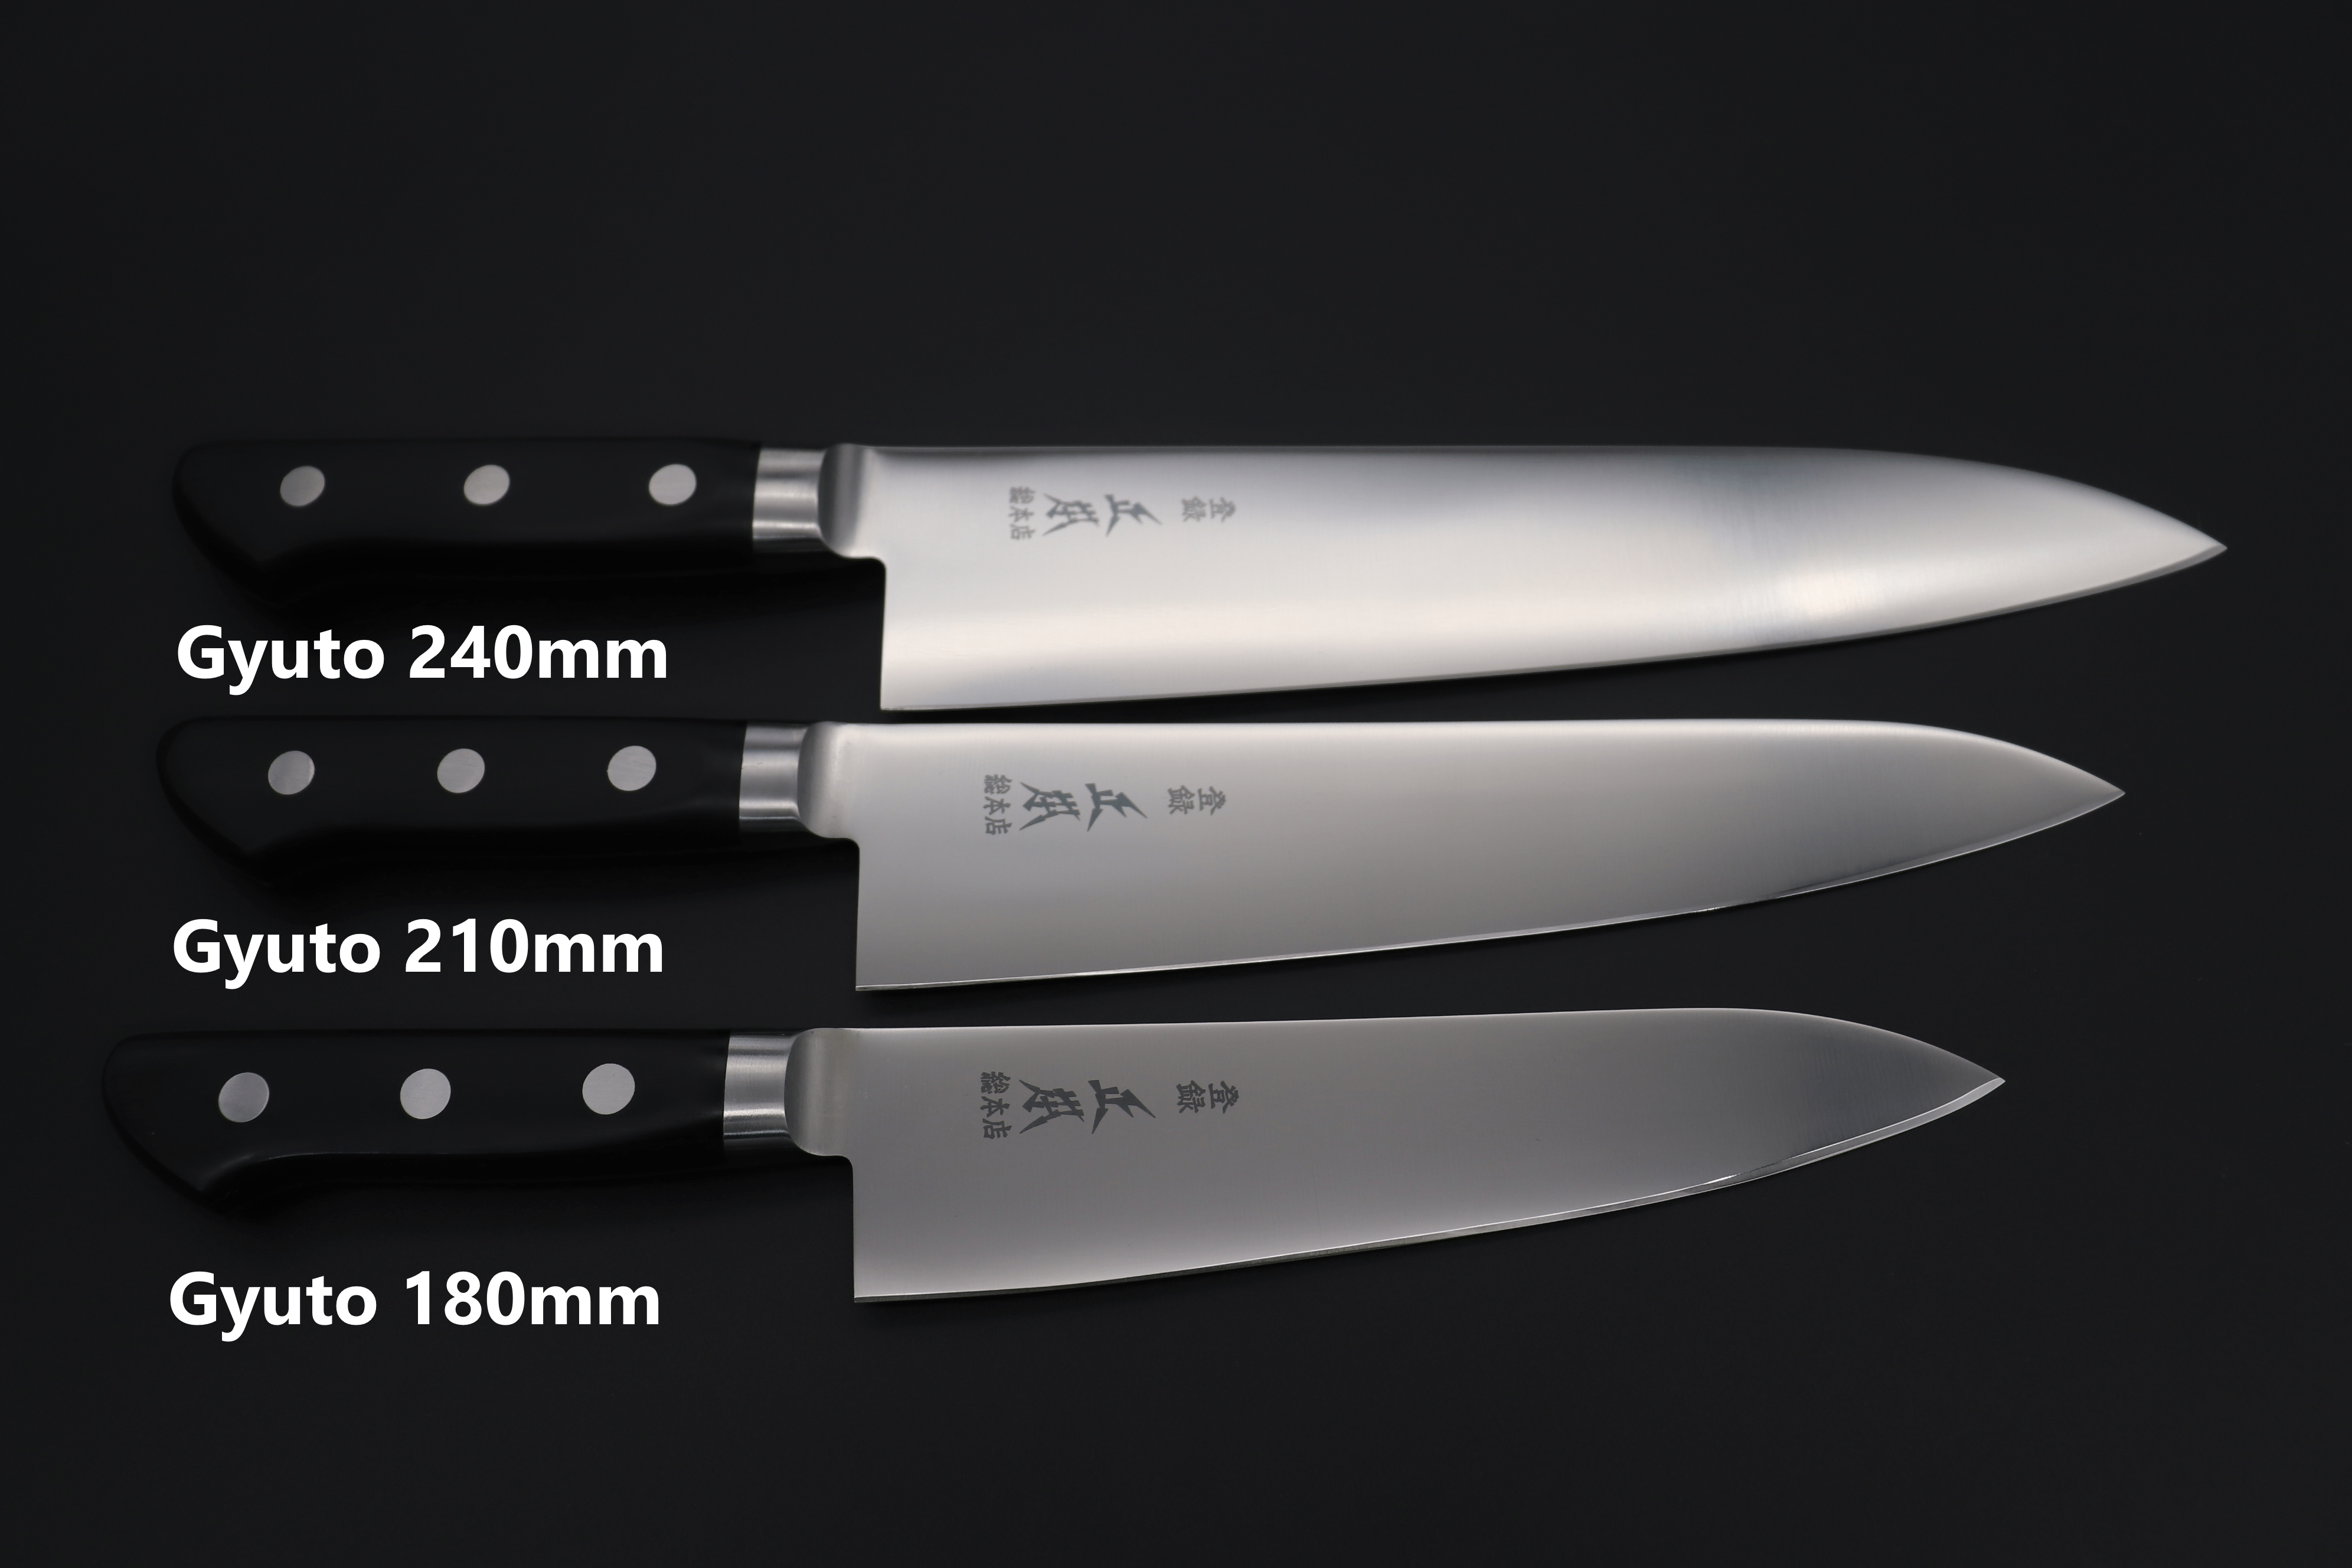 Chef Knife, 10 Inch | Brown & Grey ABS Handle